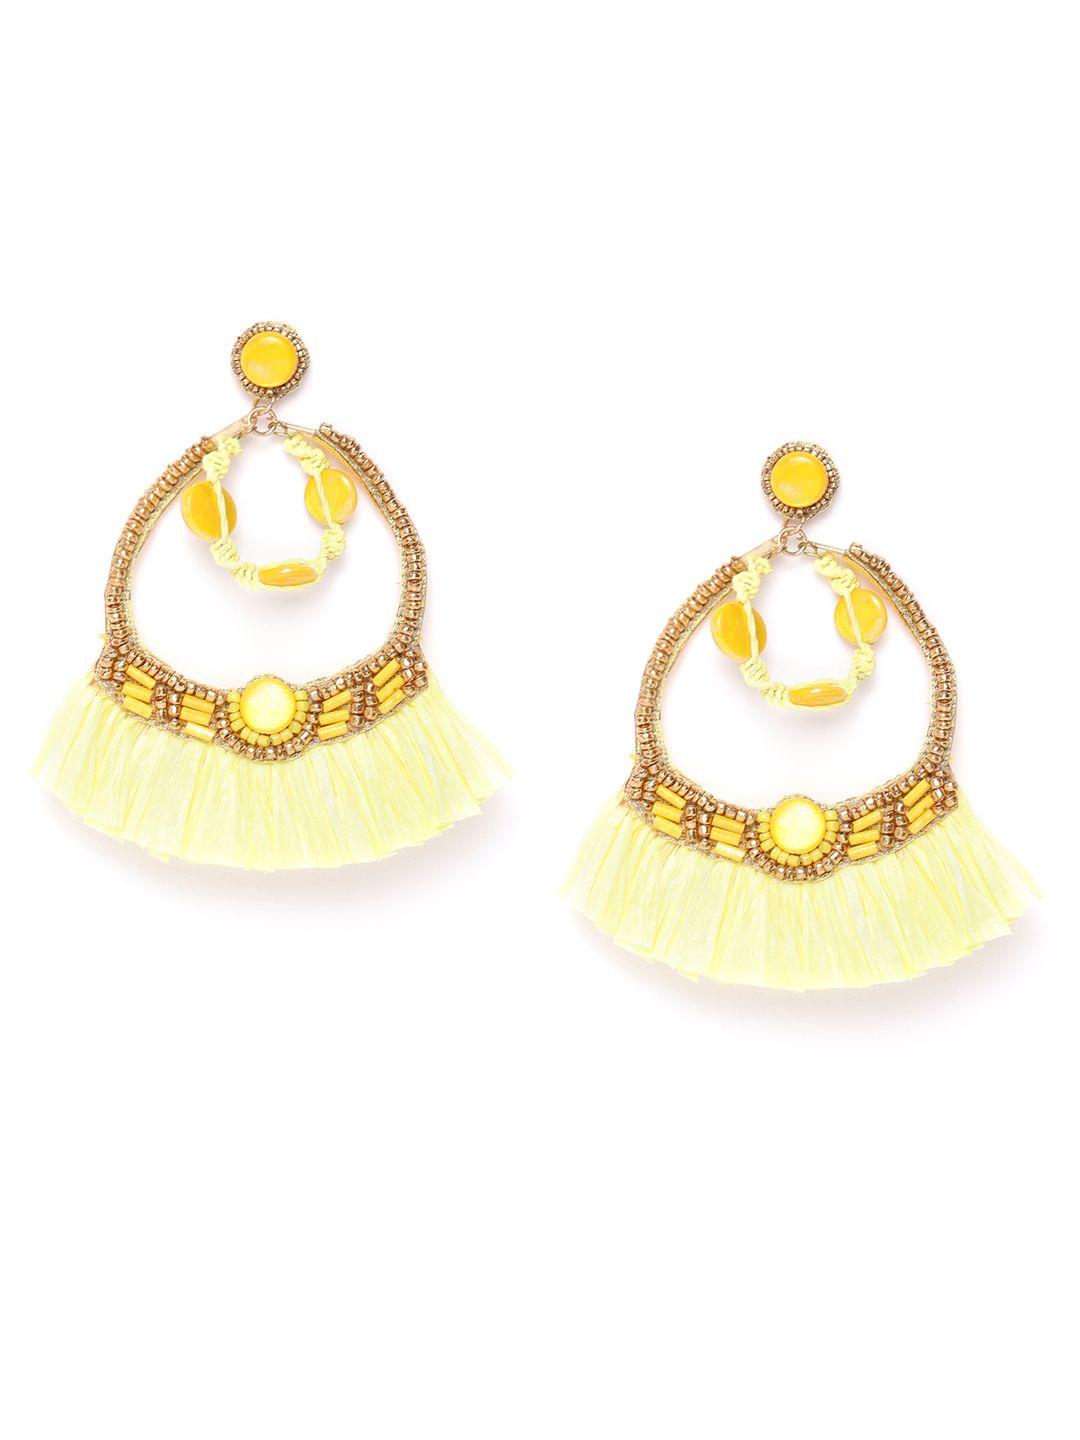 diva walk exclusive yellow & gold-toned beaded contemporary drop earrings